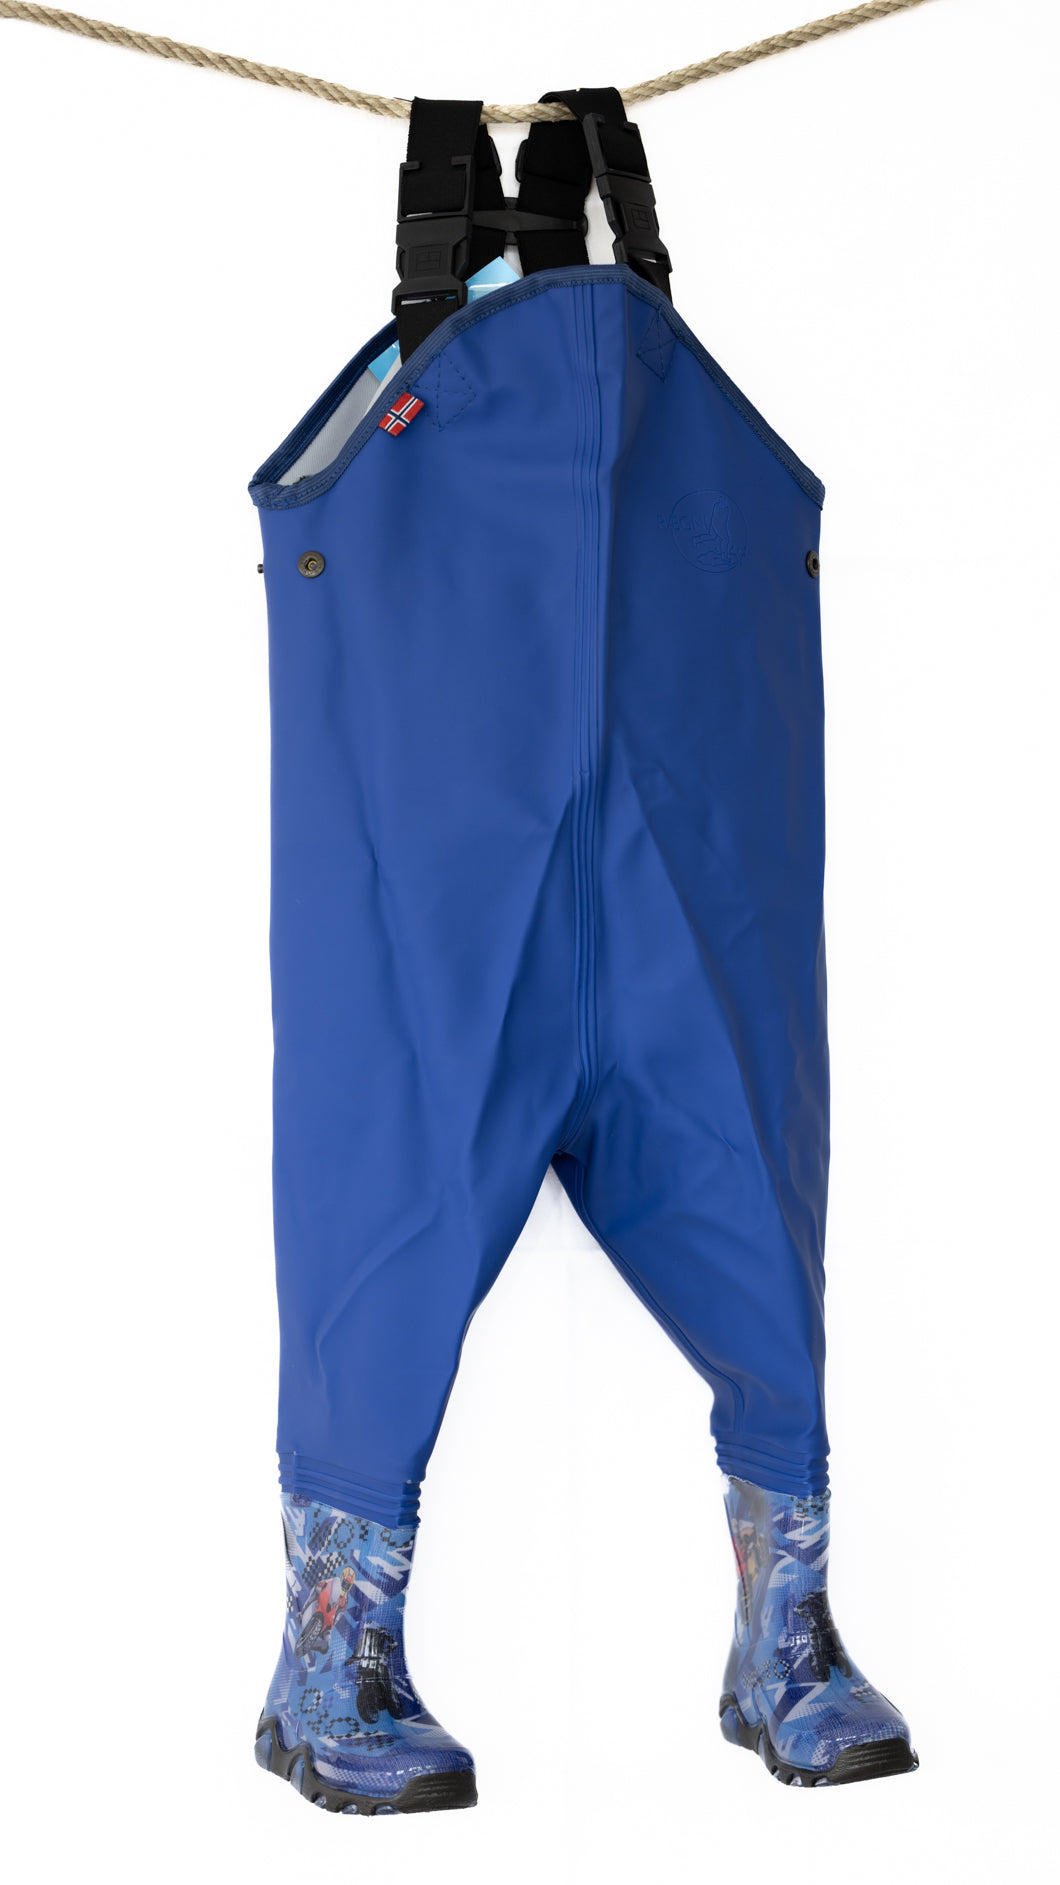 Rægni - Kids Waders with integrated boots - Blue Stormer